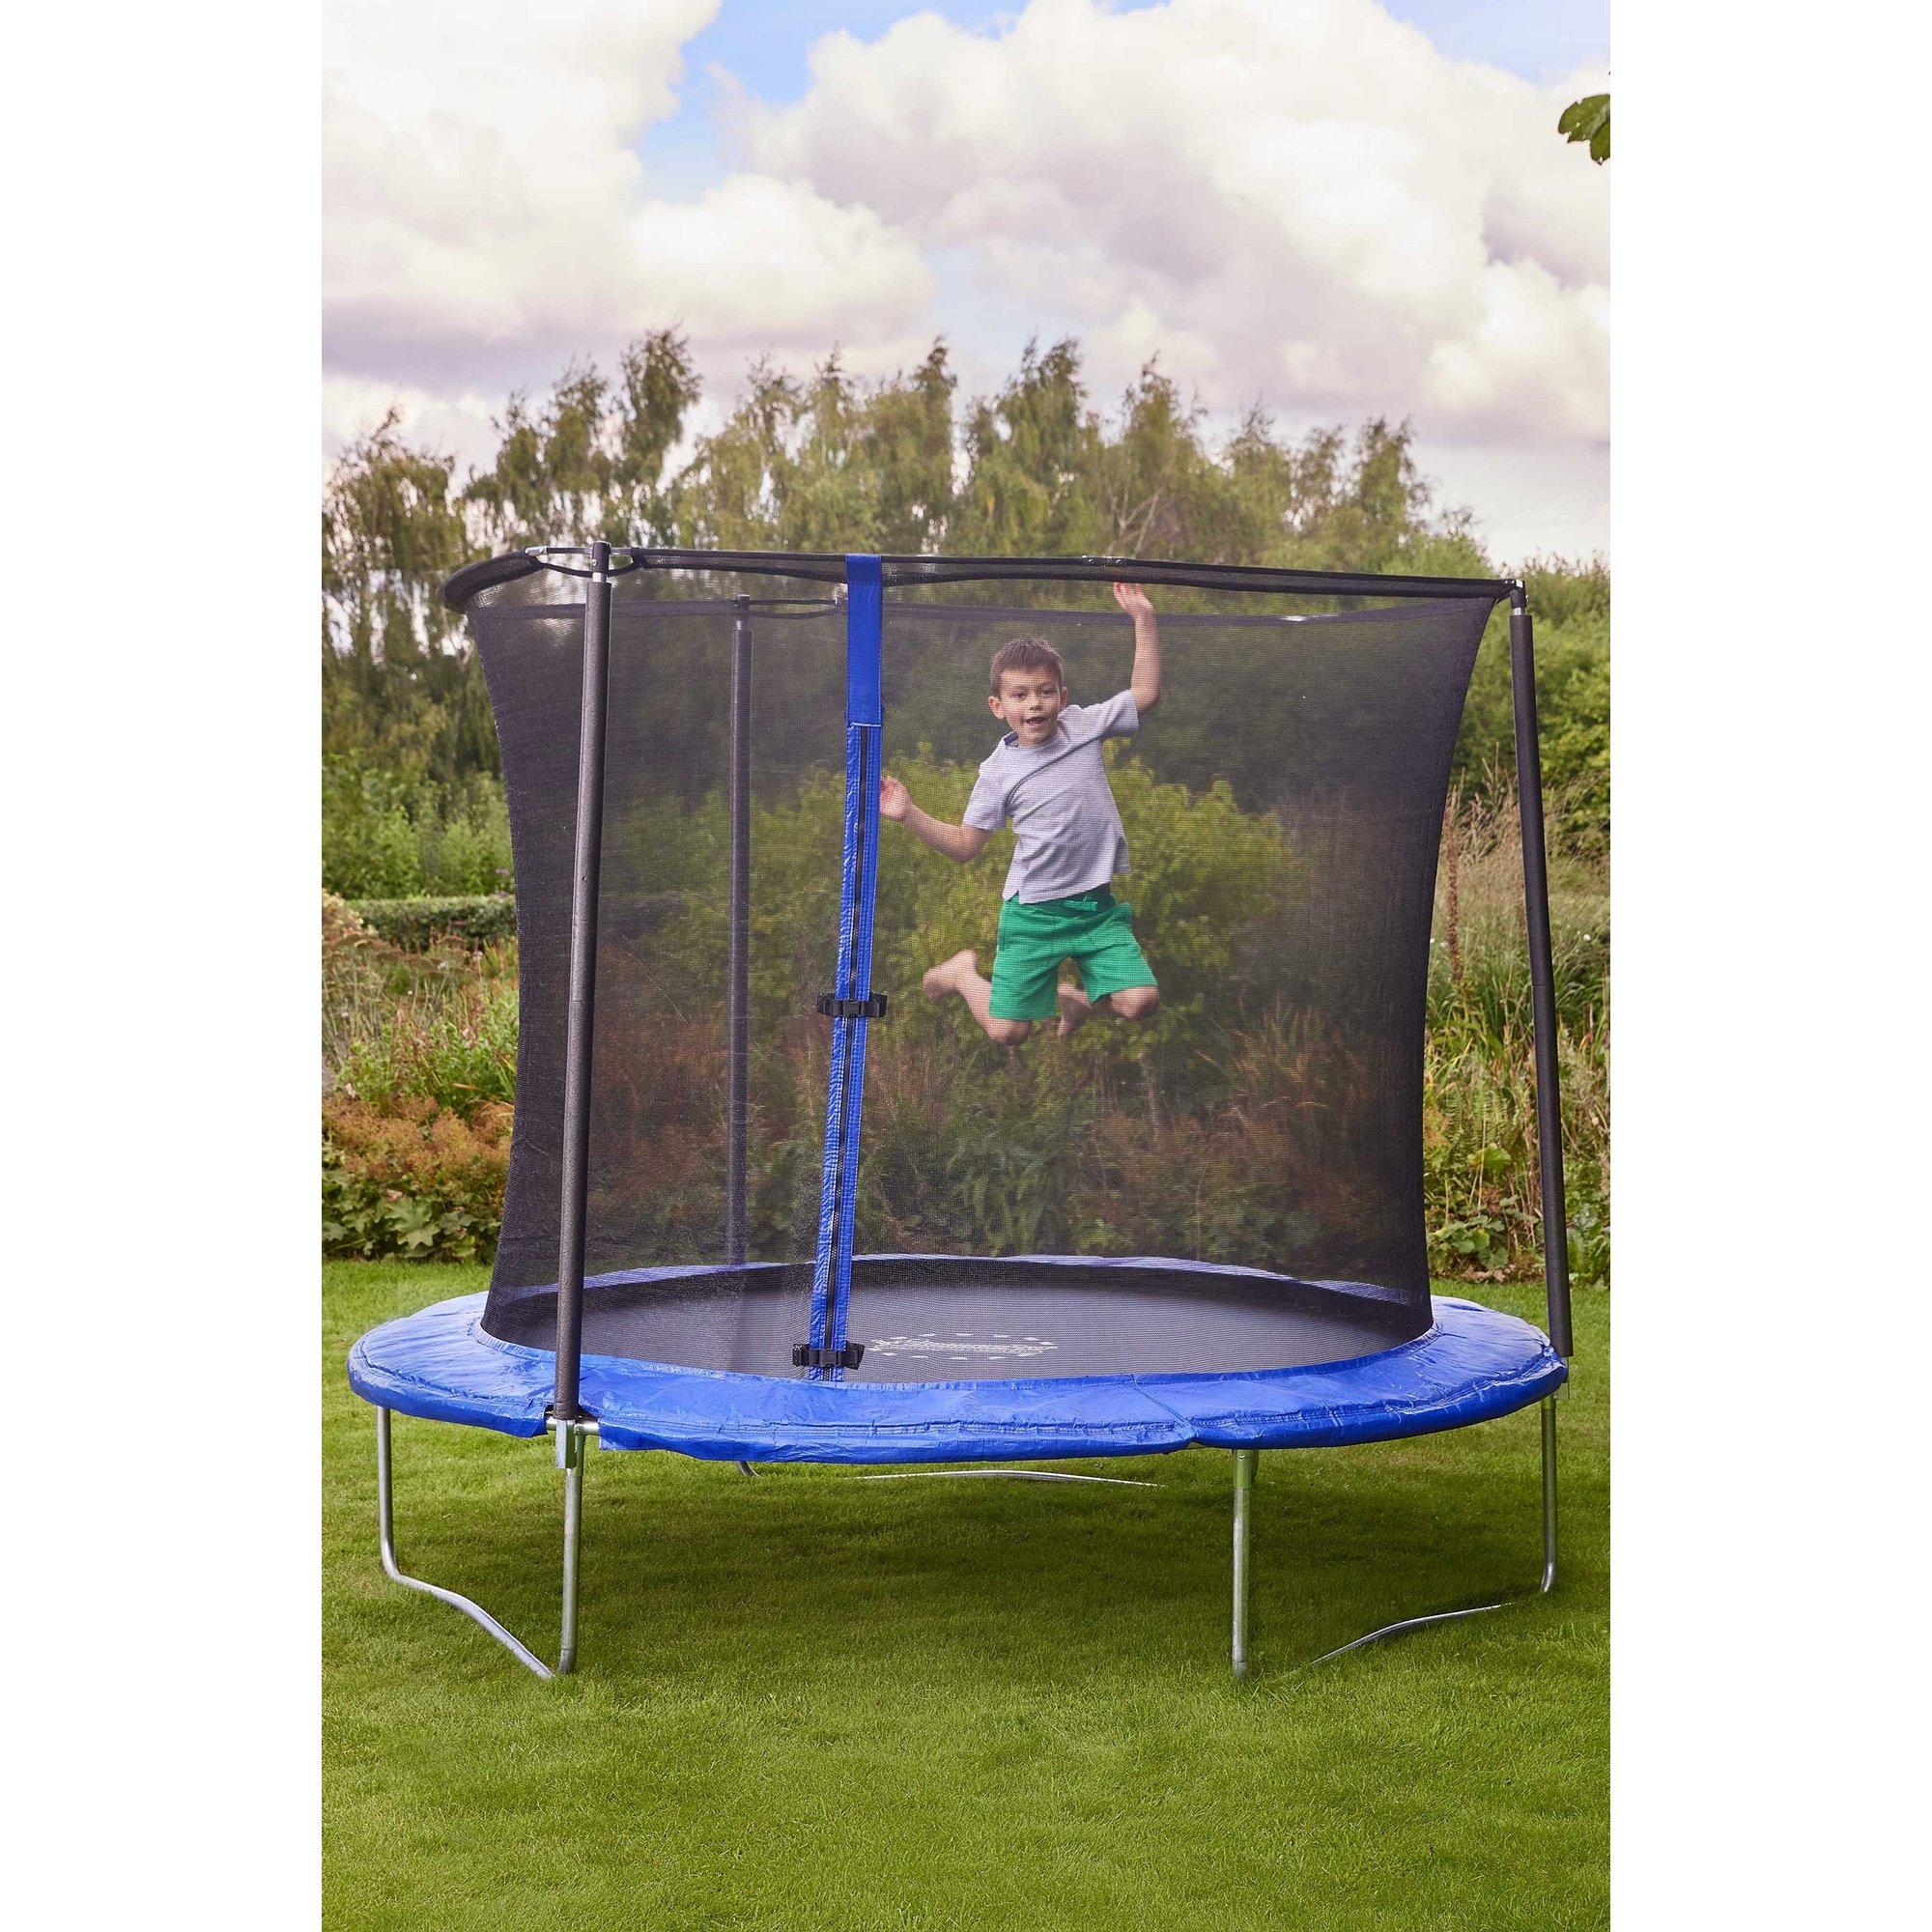 Sportspower 8ft Bounce Pro Trampoline with Enclosure